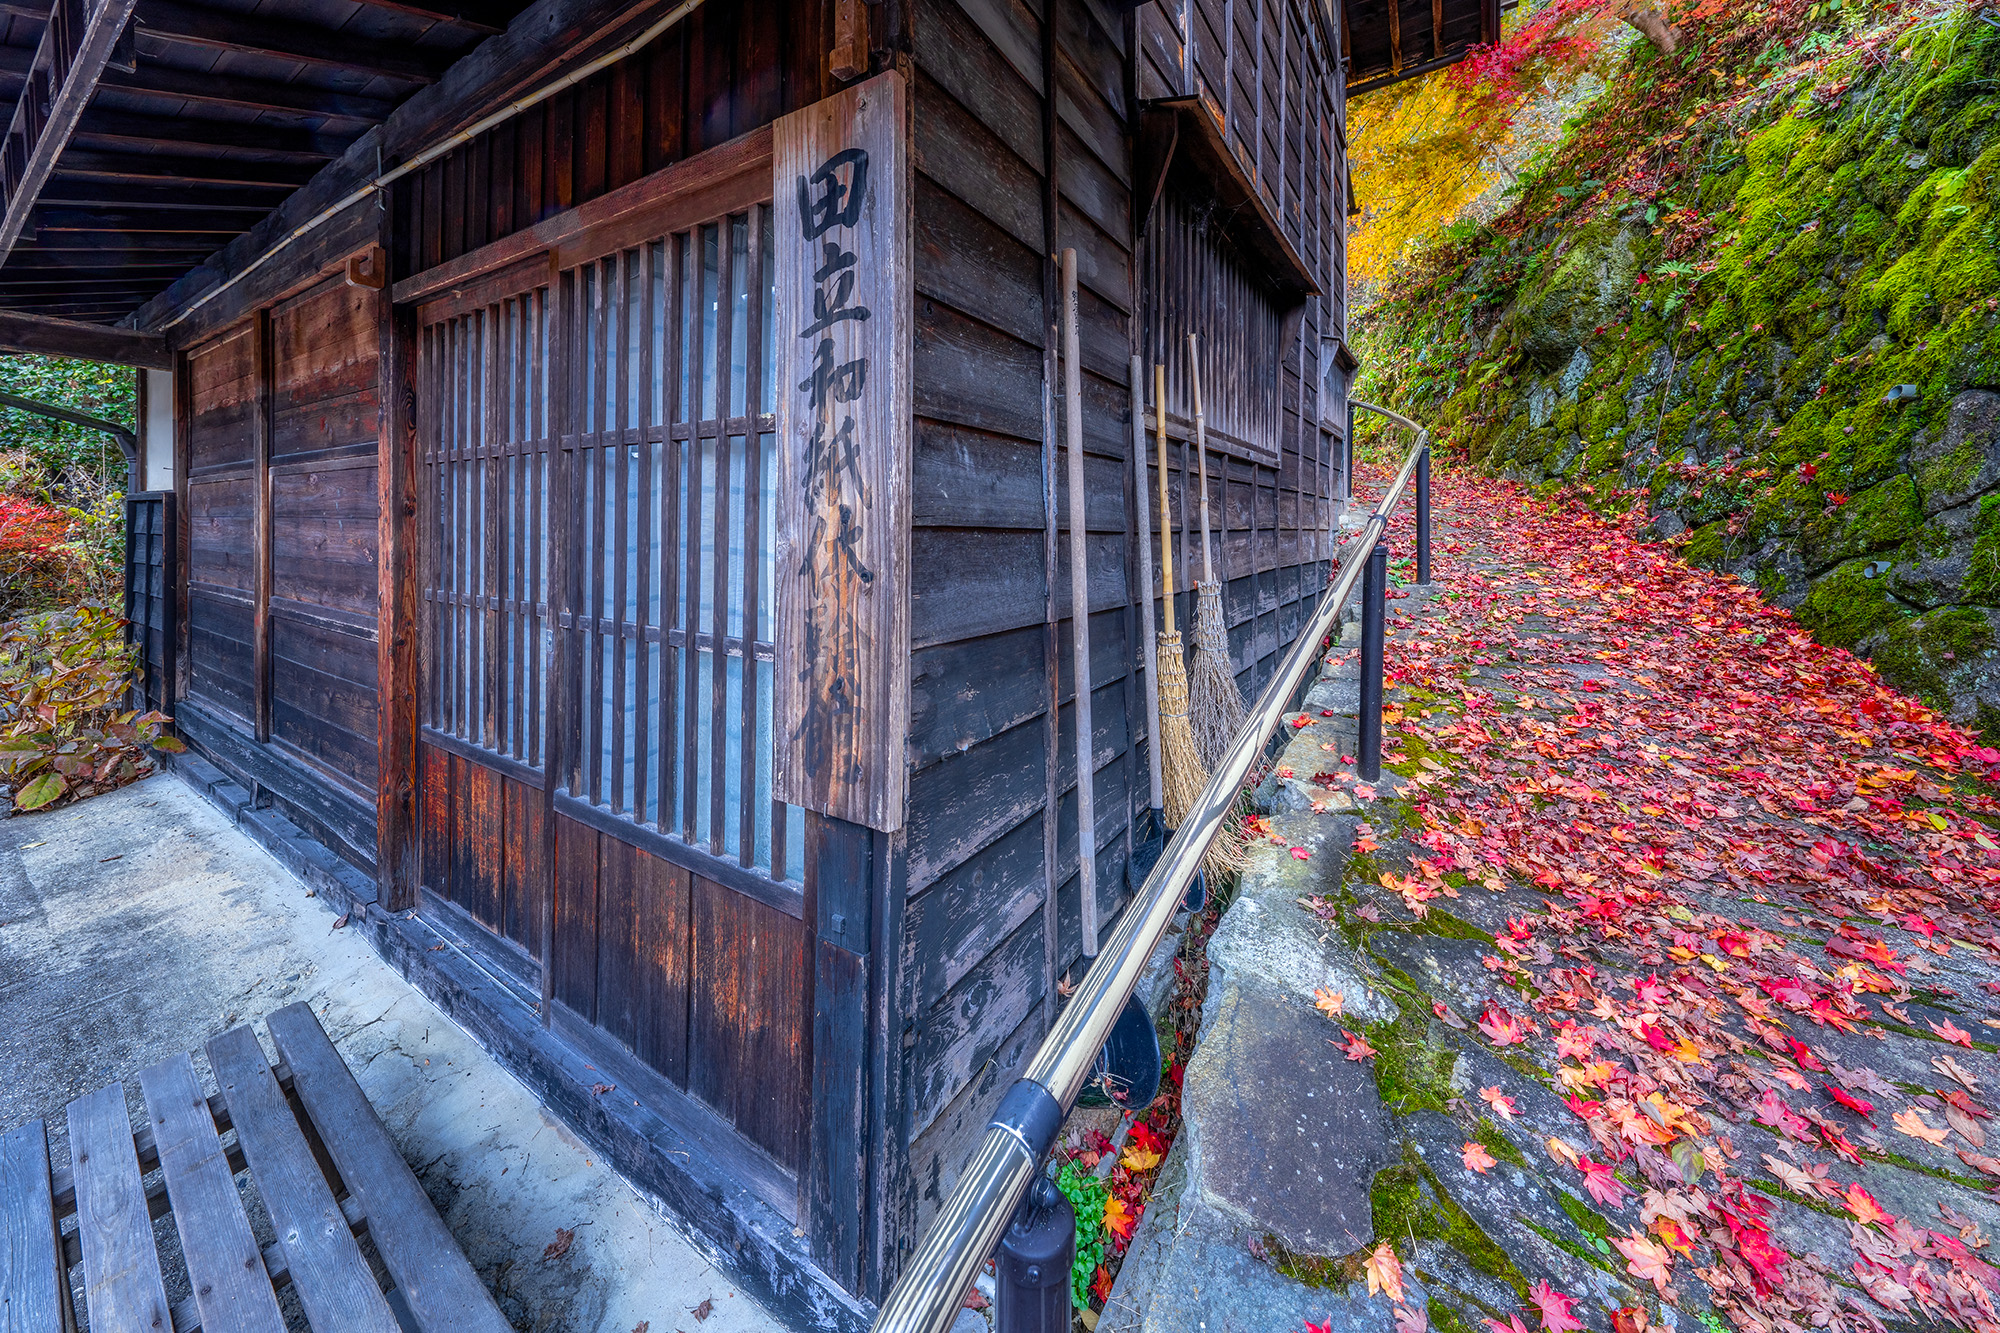 "Tranquil Threshold" offers an unconventional perspective in Tsumago, Japan. Captured with the expansive Sony 12-24mm lens, the...